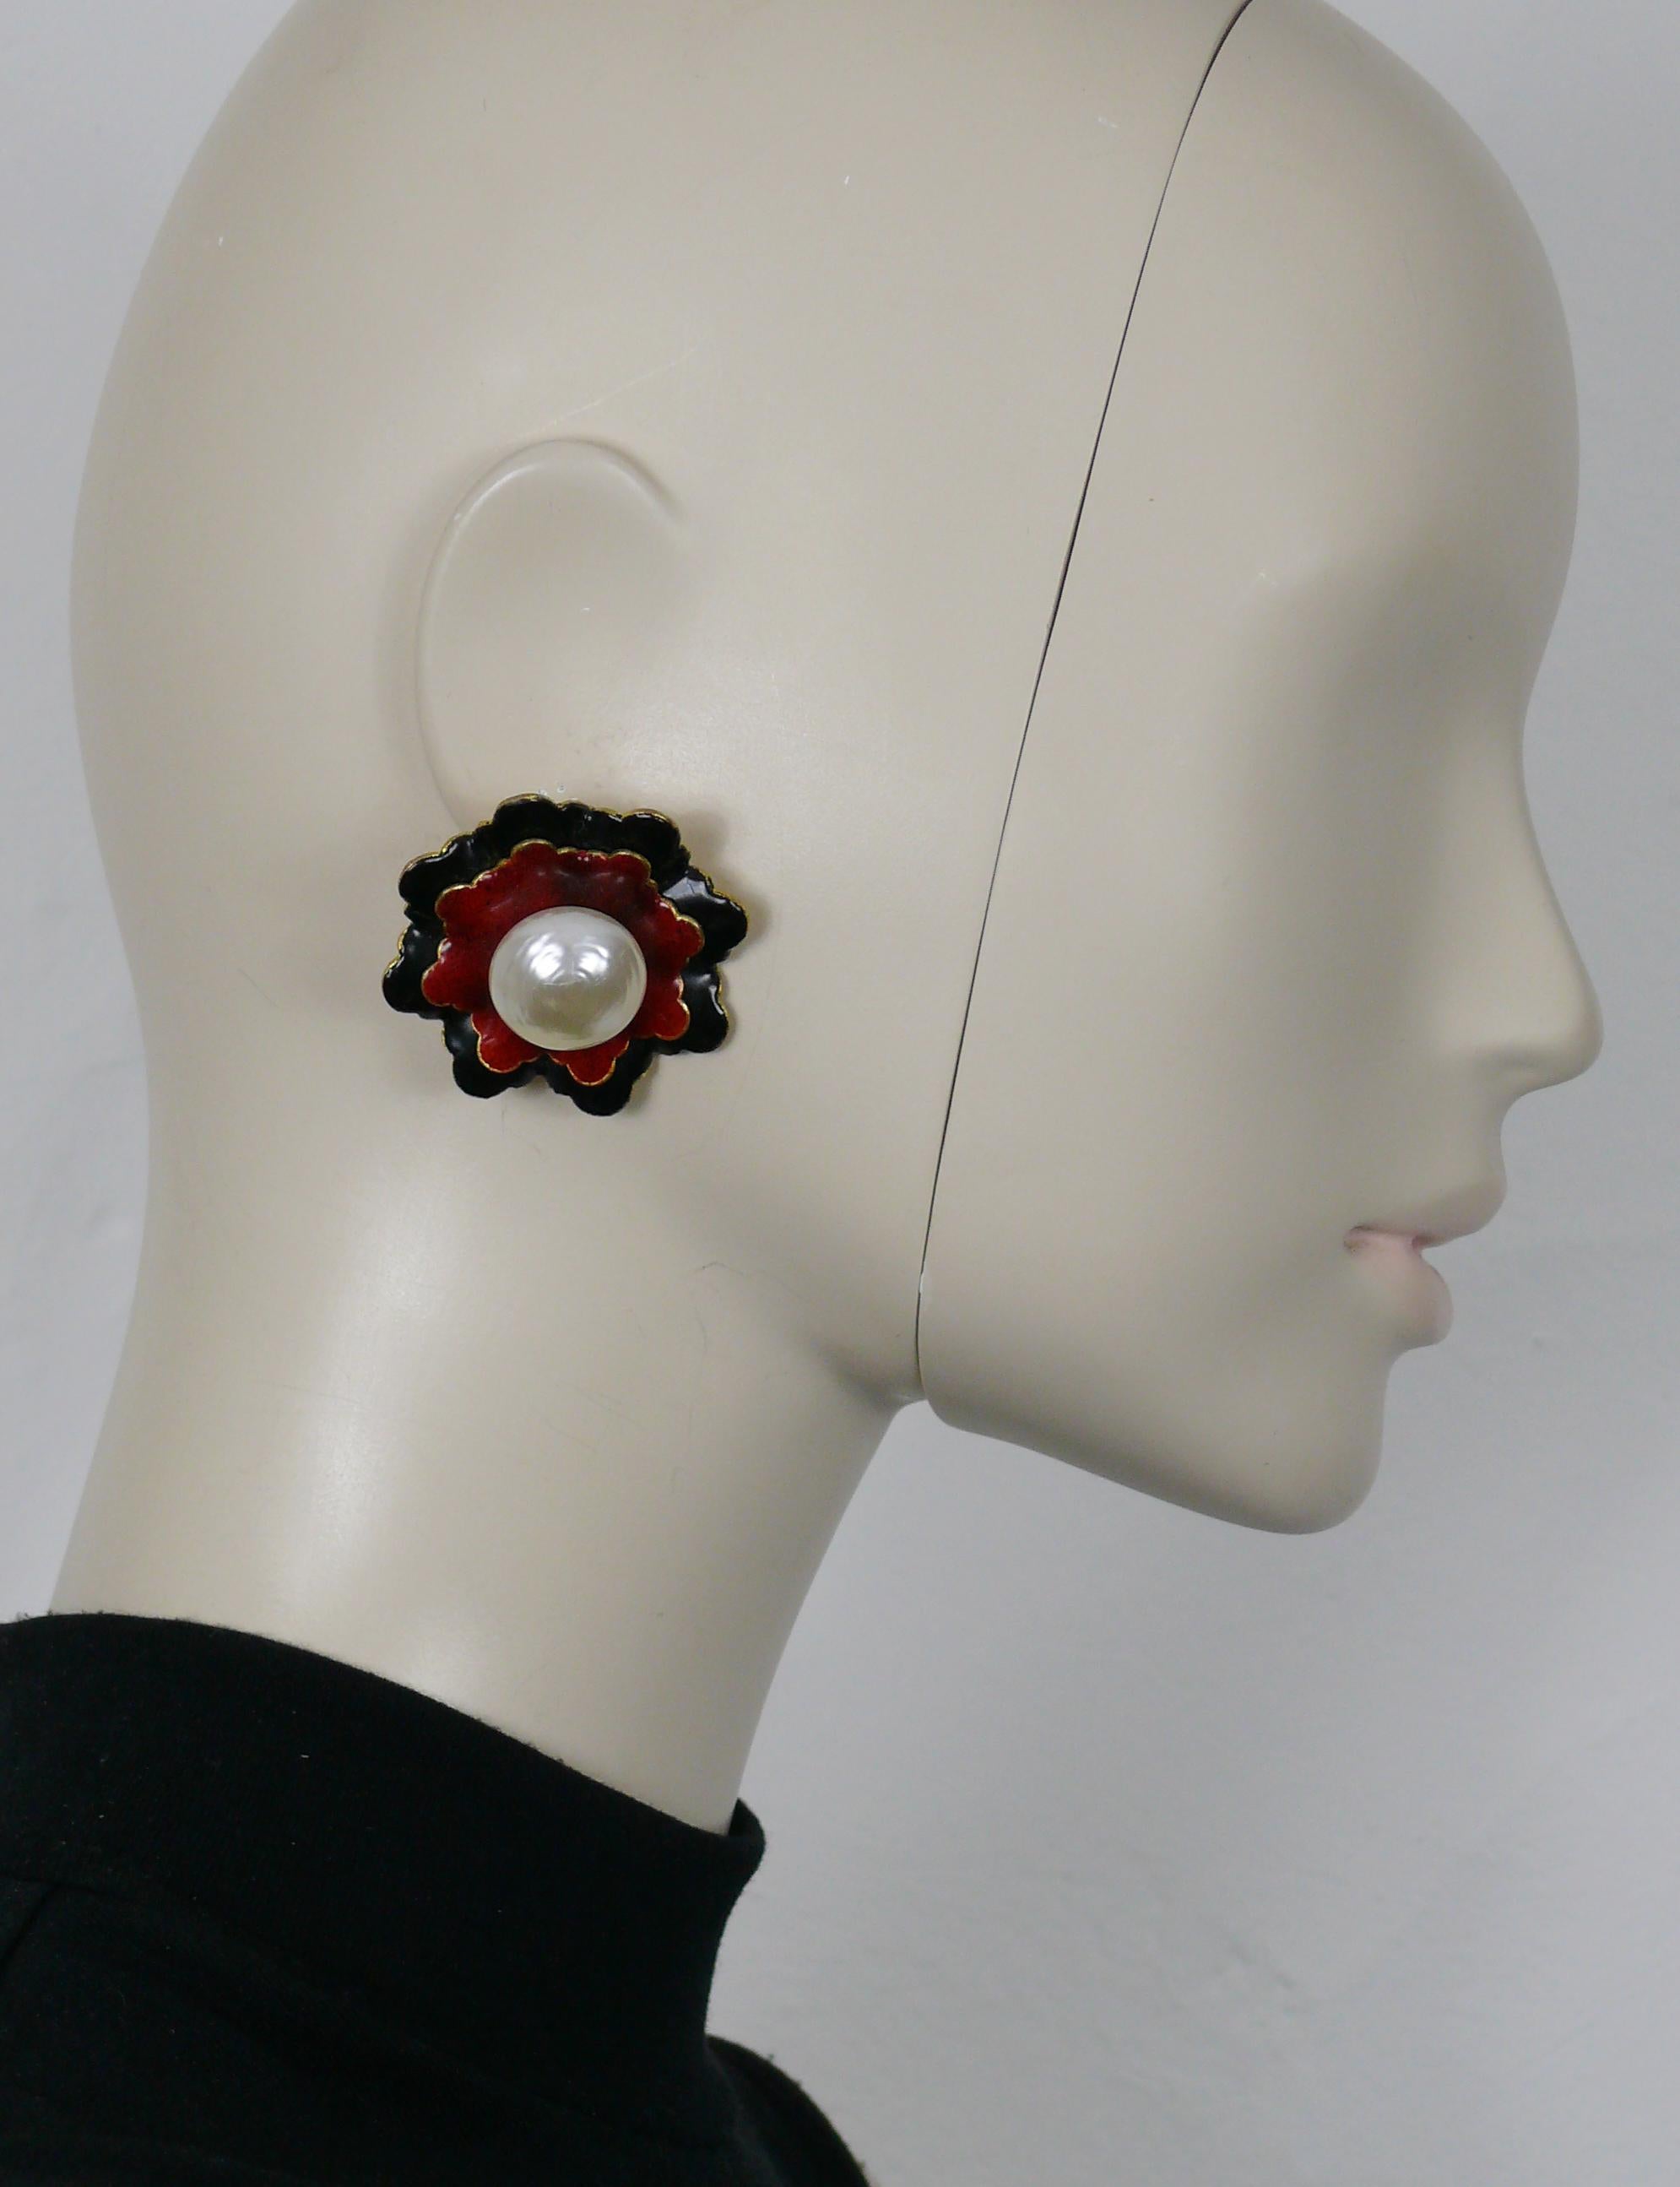 YVES SAINT LAURENT vintage black/red enamel flower design clip-on earrings embellished with a large faux pearl at the center.

Embossed YSL.

Indicative measurements : approx. 4.2 cm x 4 cm (1.65 inches x 1.57 inches).

Weight per earring : approx.